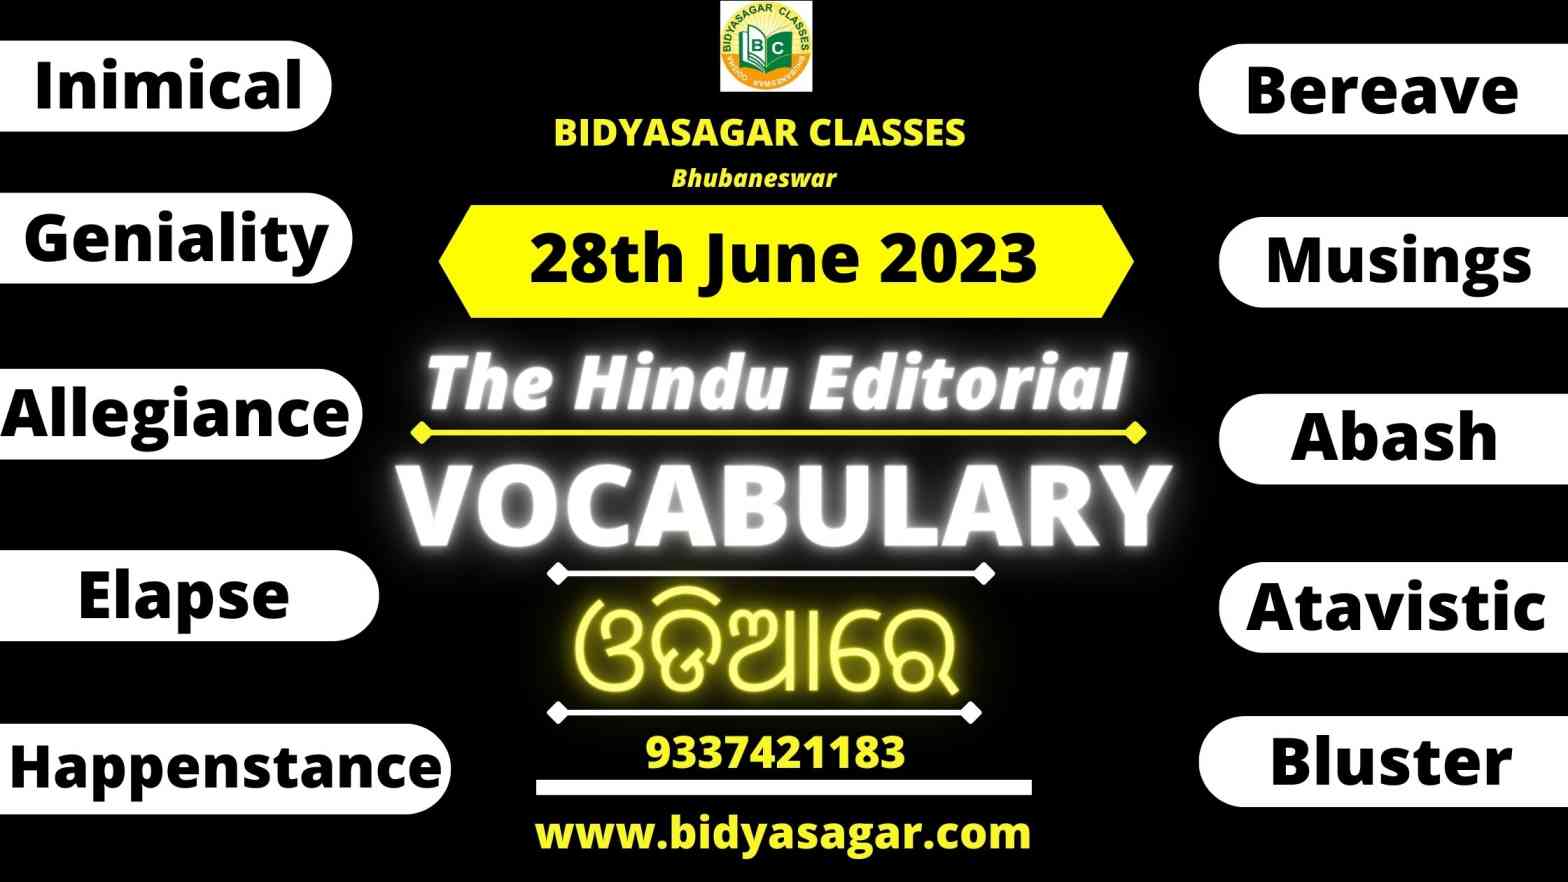 The Hindu Editorial Vocabulary of 28th June 2023